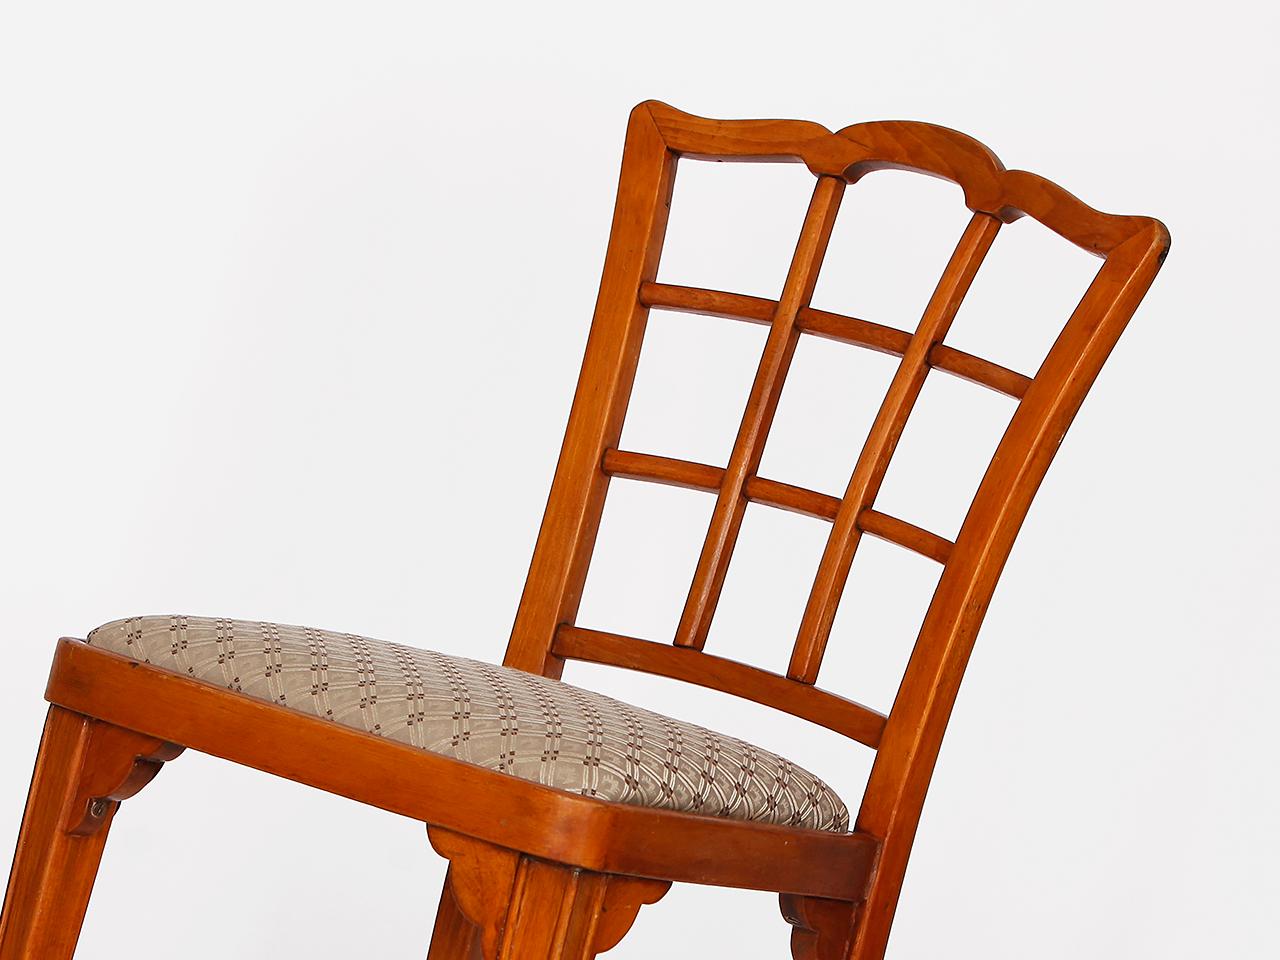 Beech Art Nouveau Chair A 562 by Otto Prutscher for Thonet, 1910s For Sale